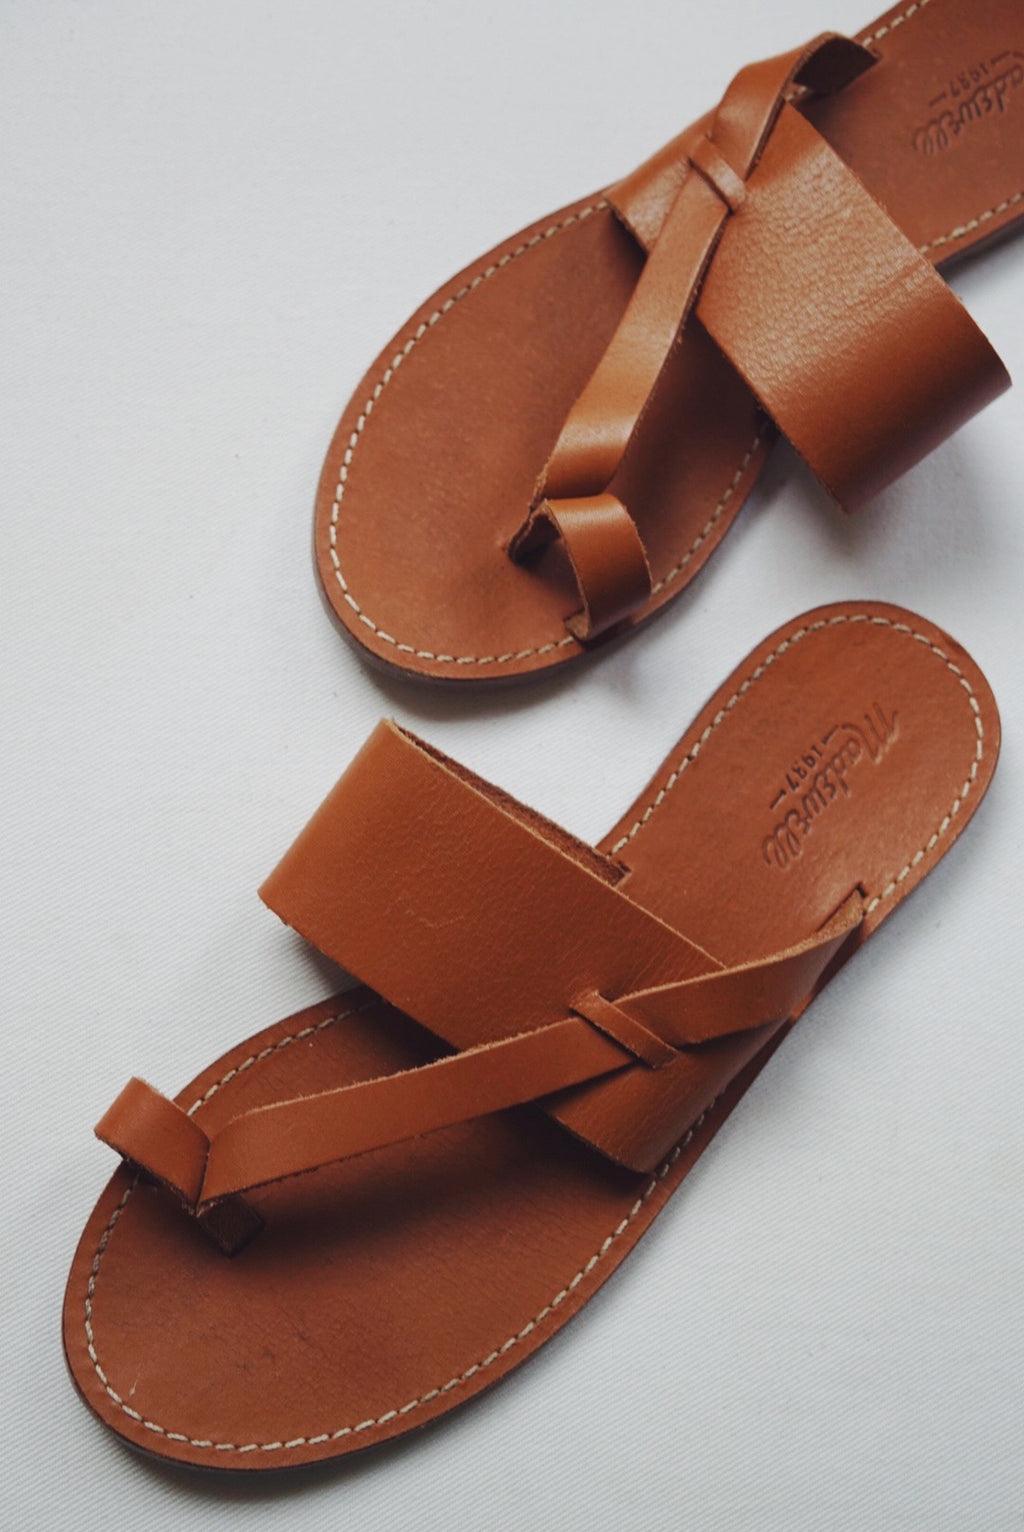 Madewell Leather Sandals